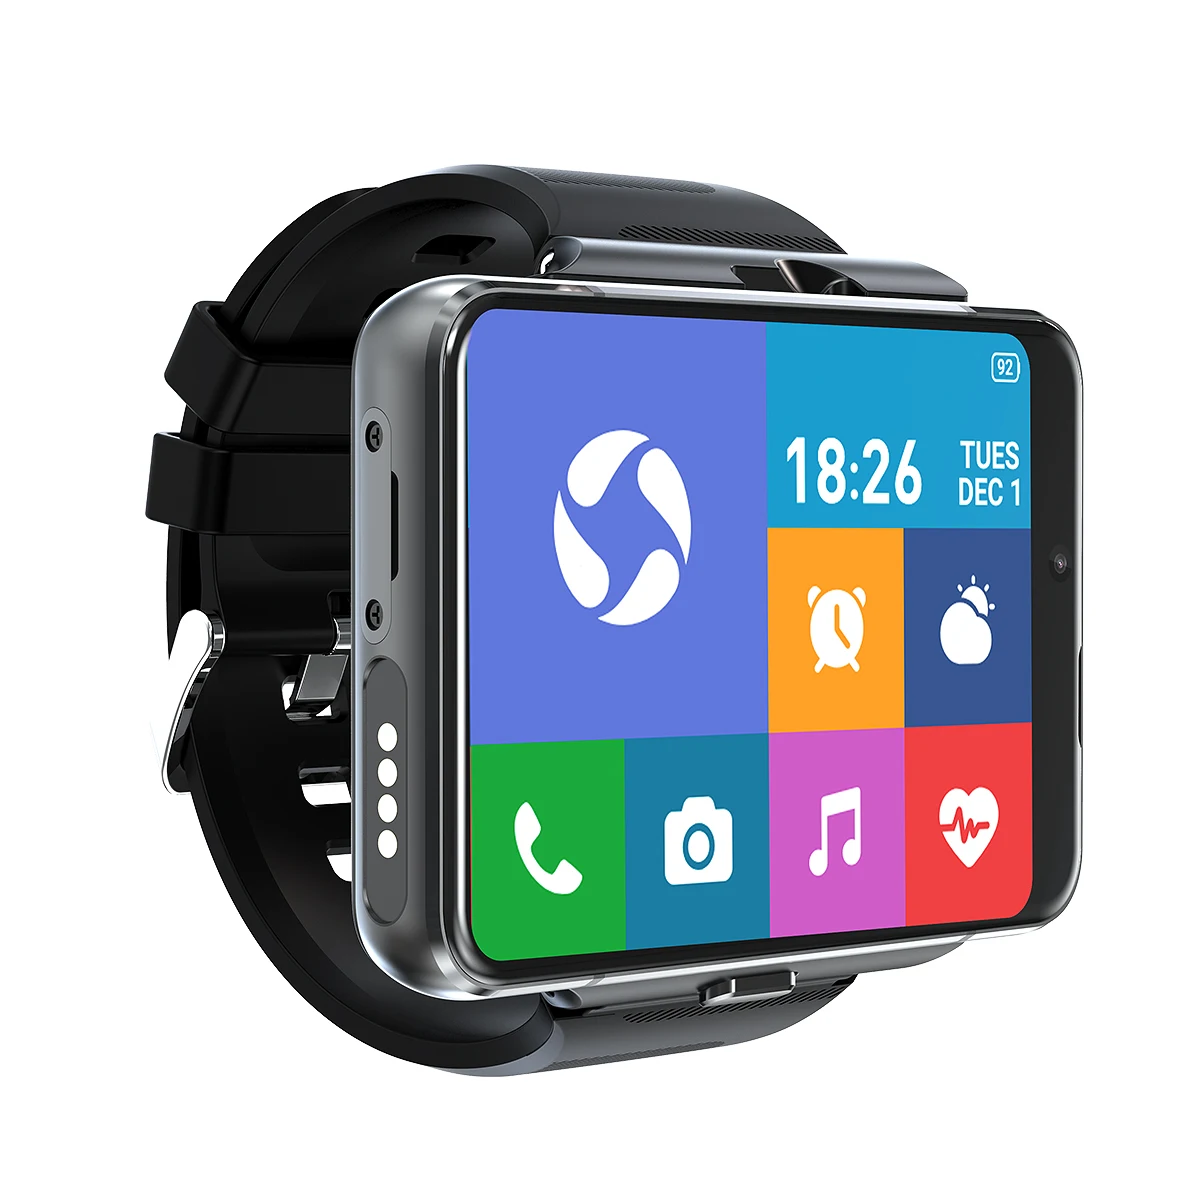 Permalink to S999 Smartwatch 4G Smart Bracelet 4 Men’s Watches Full Netcom +64GB Rechargeable Removable Smart Bracelet For Video Call